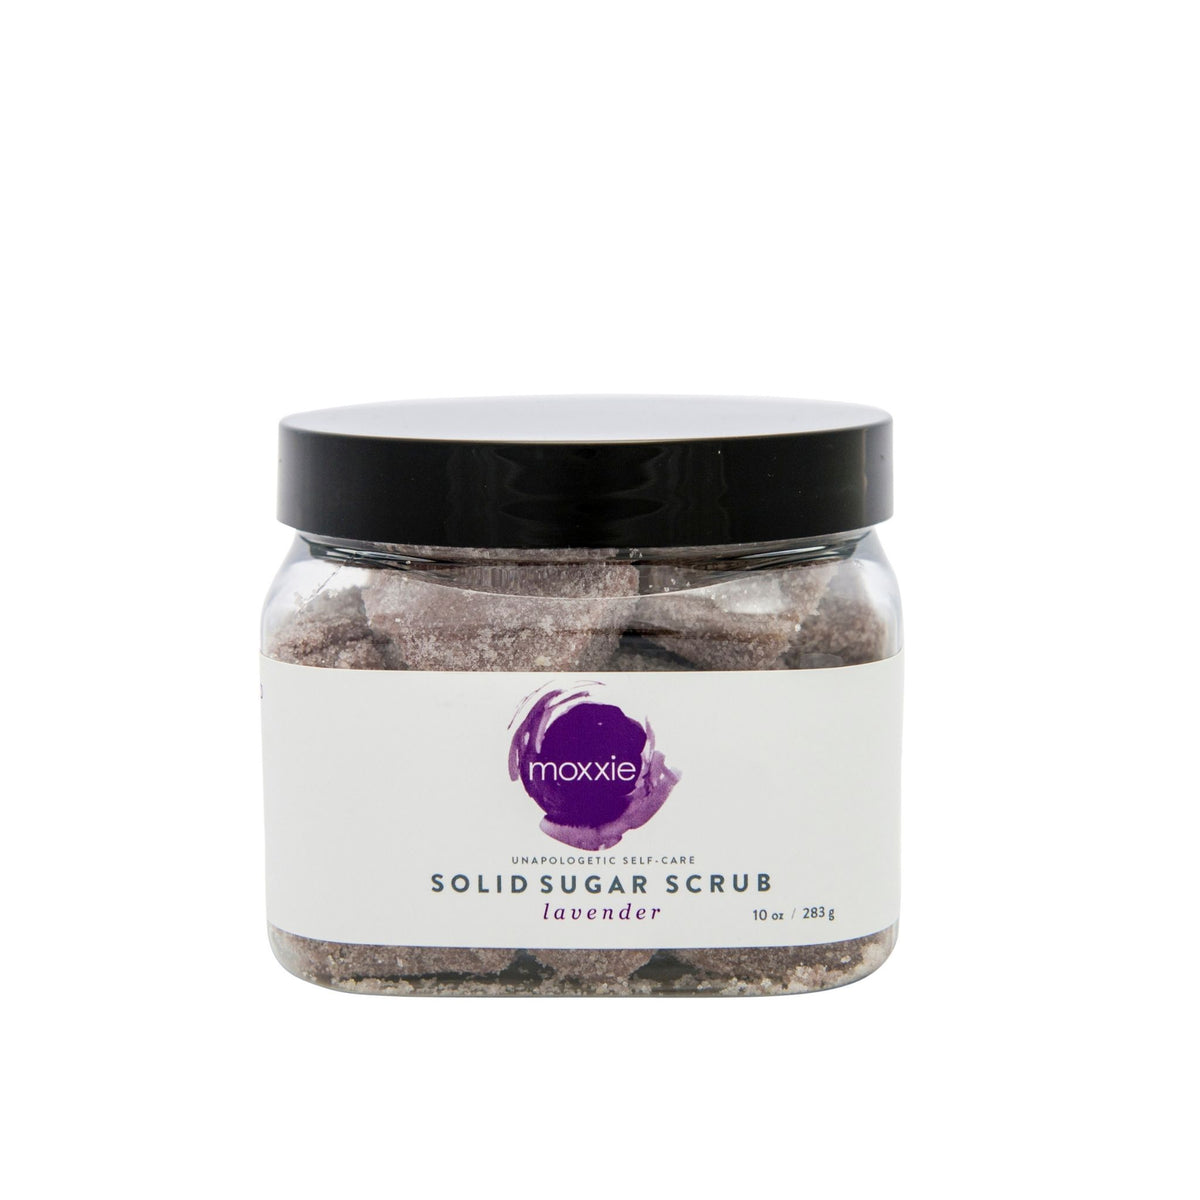 Moxxie handcrafted, plant ingredient solid sugar scrub lavender. made in the usa